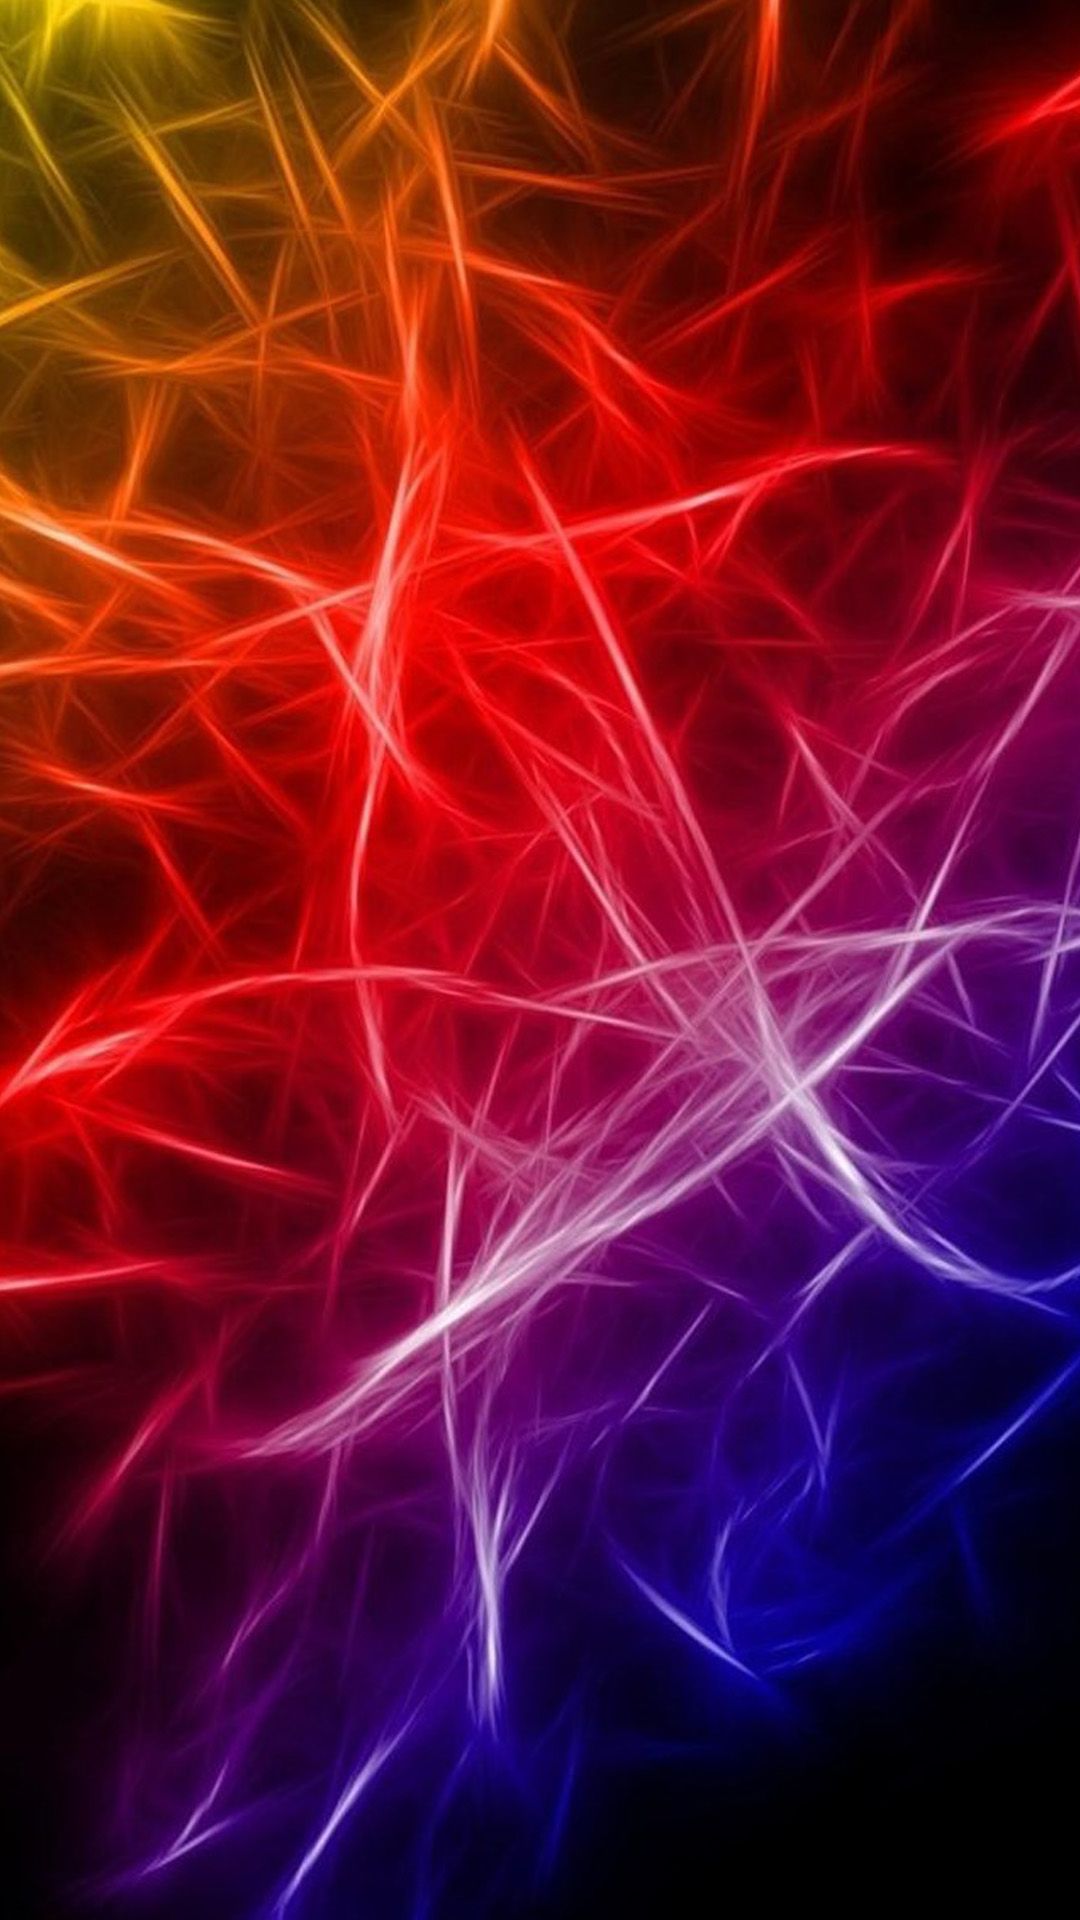 Full HD Abstract Wallpaper HD For Android. Abstract Wallpaper Download for iPhone and Android